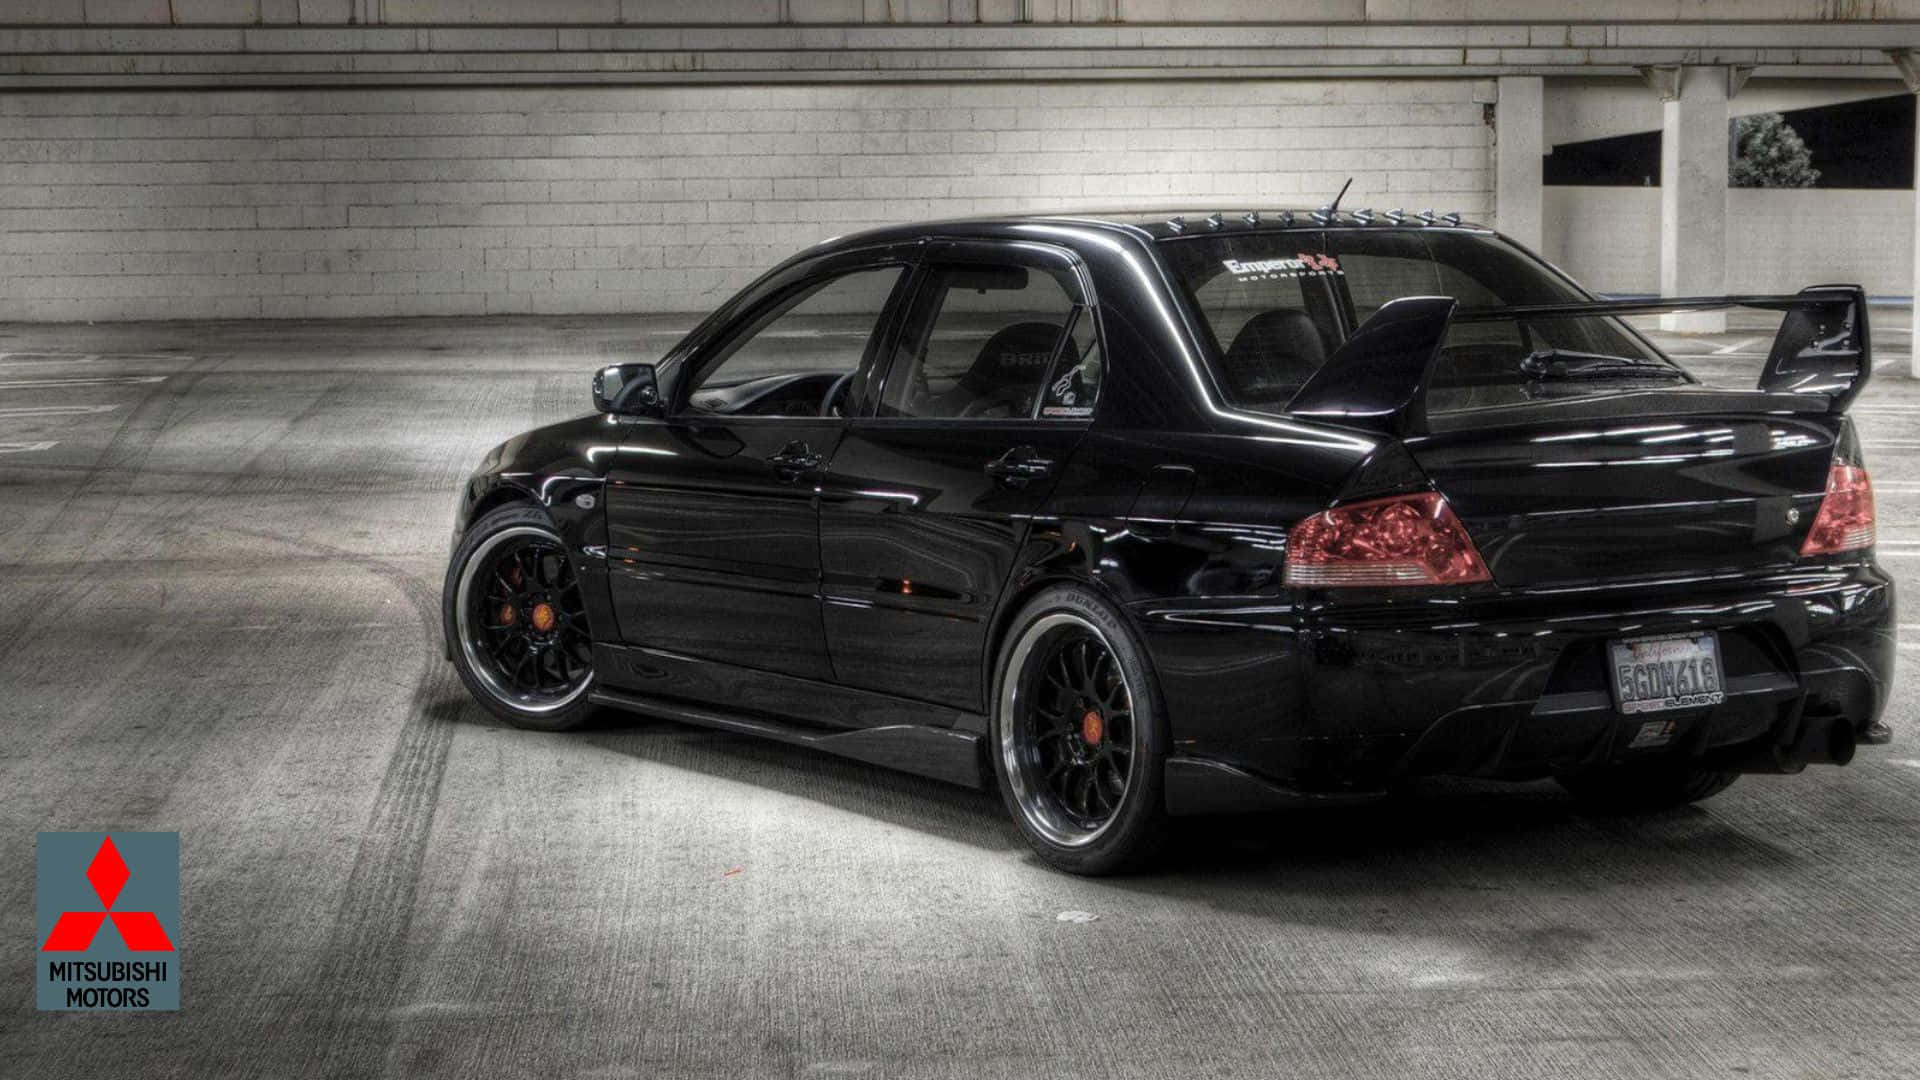 A Power Packed Performance - The Mighty Mitsubishi Lancer Evolution Wallpaper